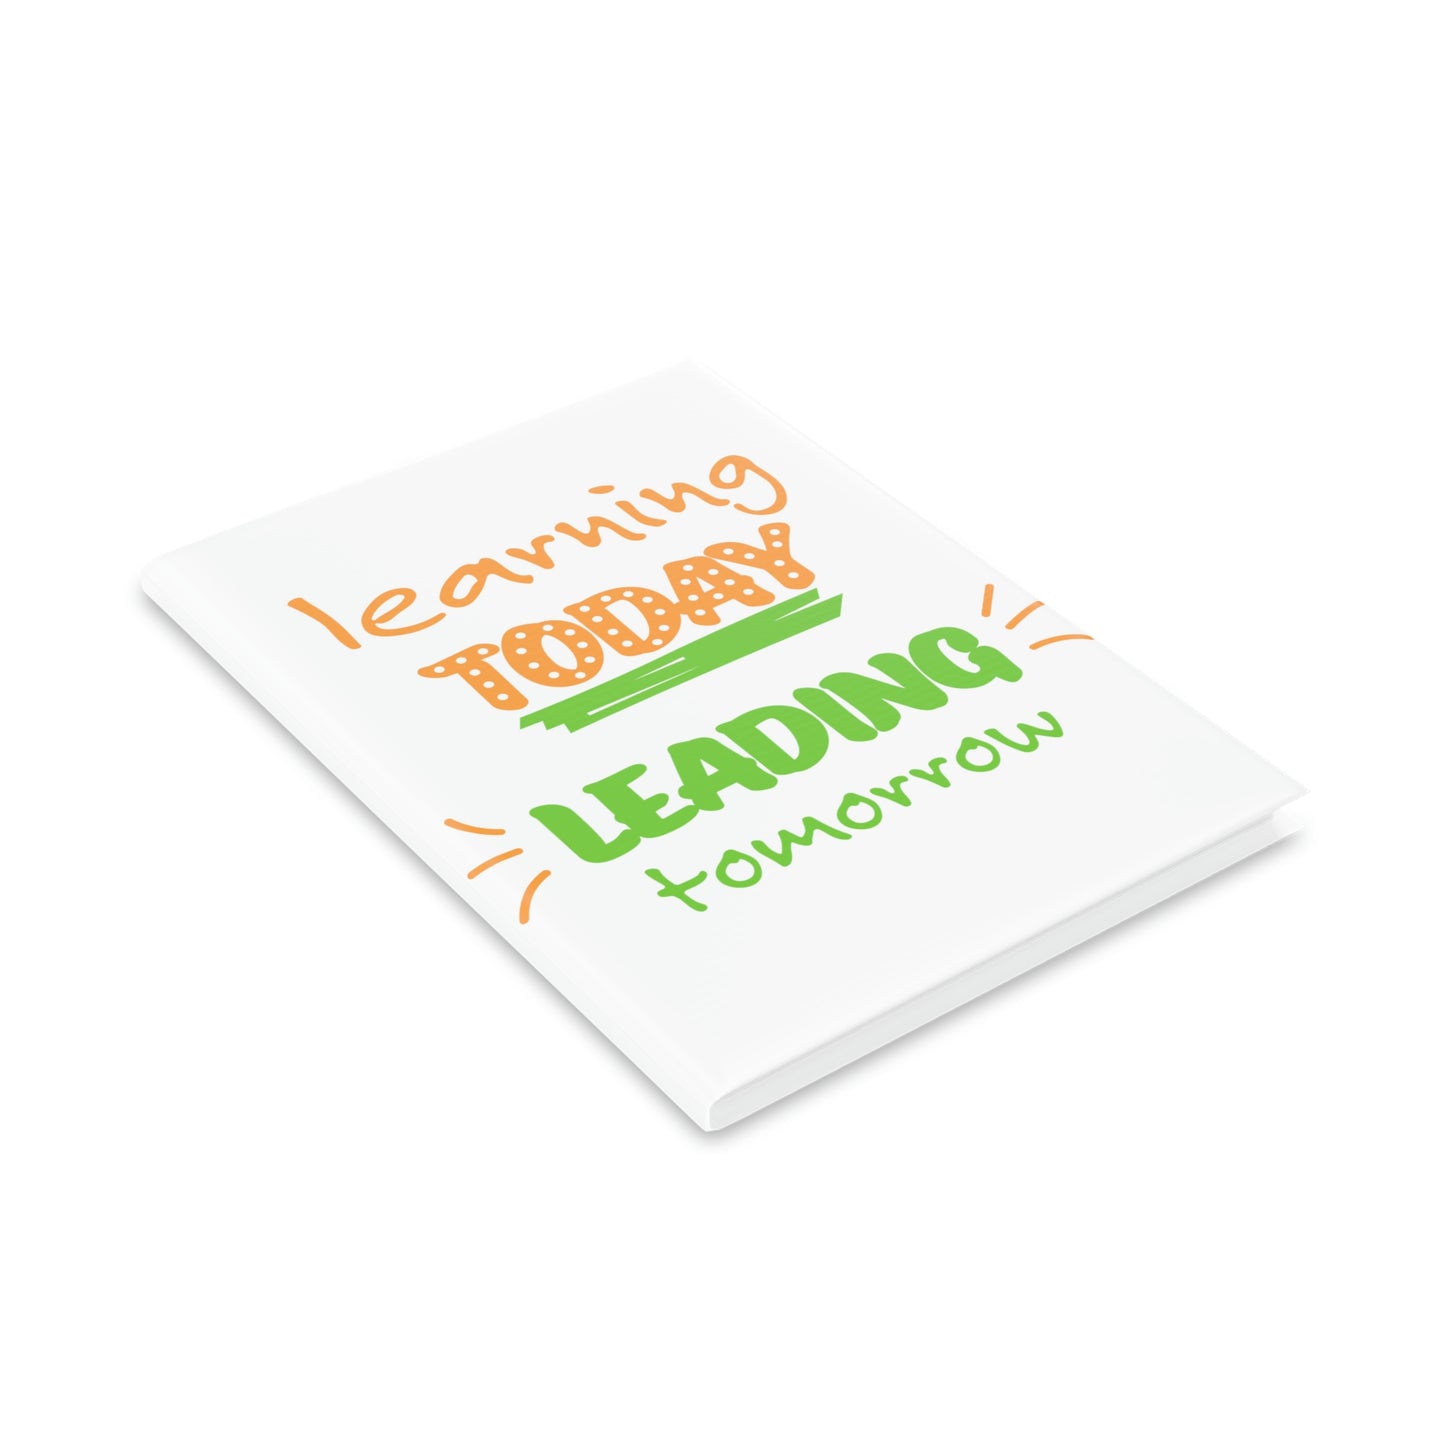 Learning - Hardcover Notebook with Puffy Covers